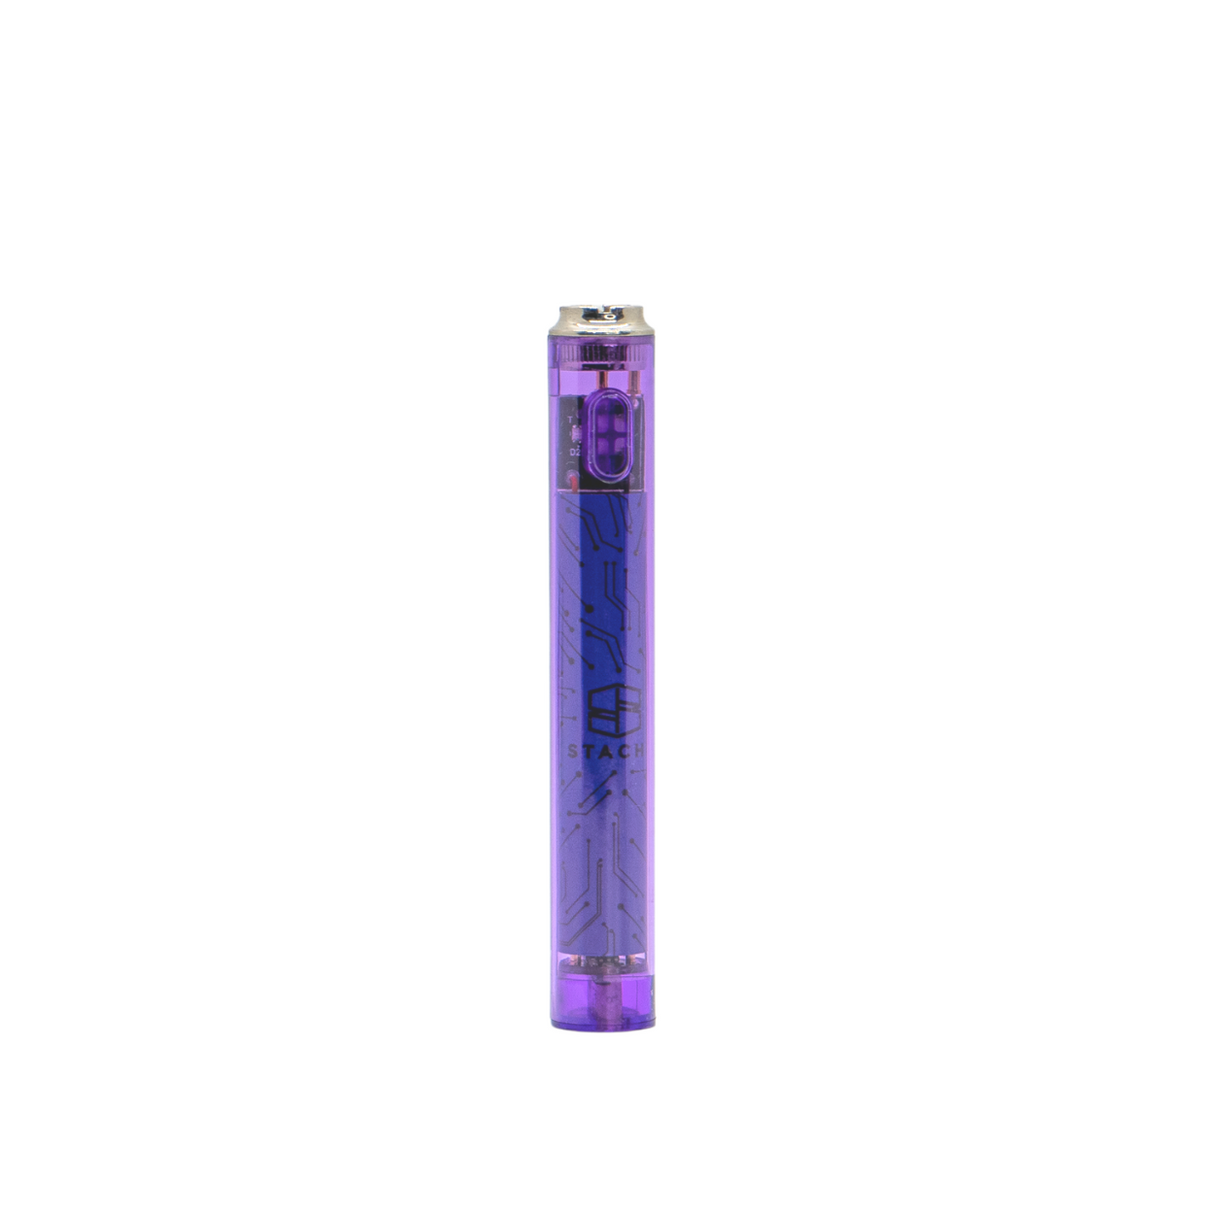 Stacheproductswholesale Transparent Battery - Front View on Seamless White Background